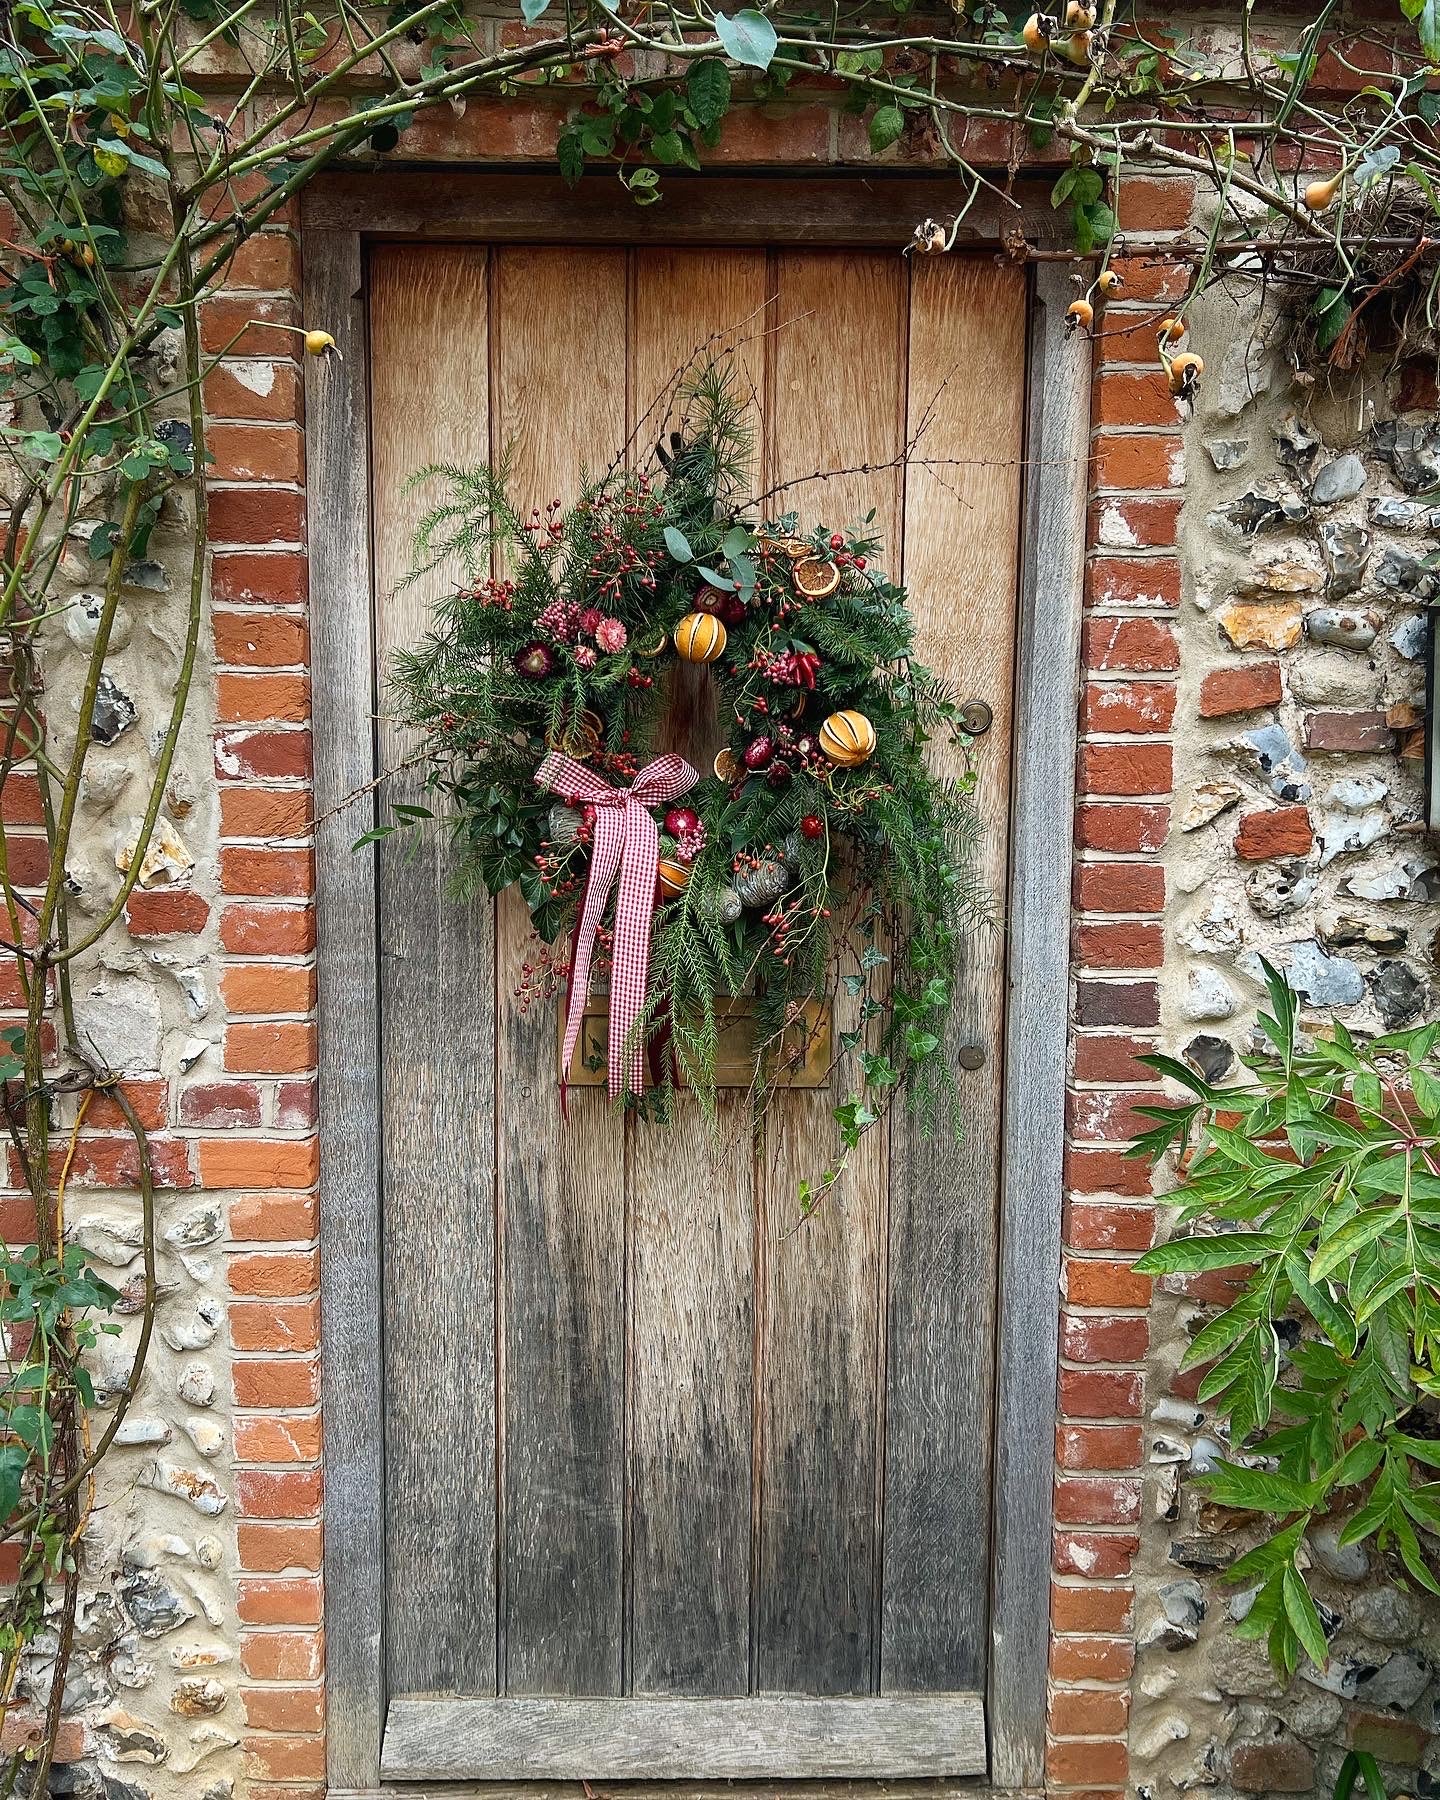 Christmas Wreath Workshop at The Dabbling Duck, Thursday 14th December